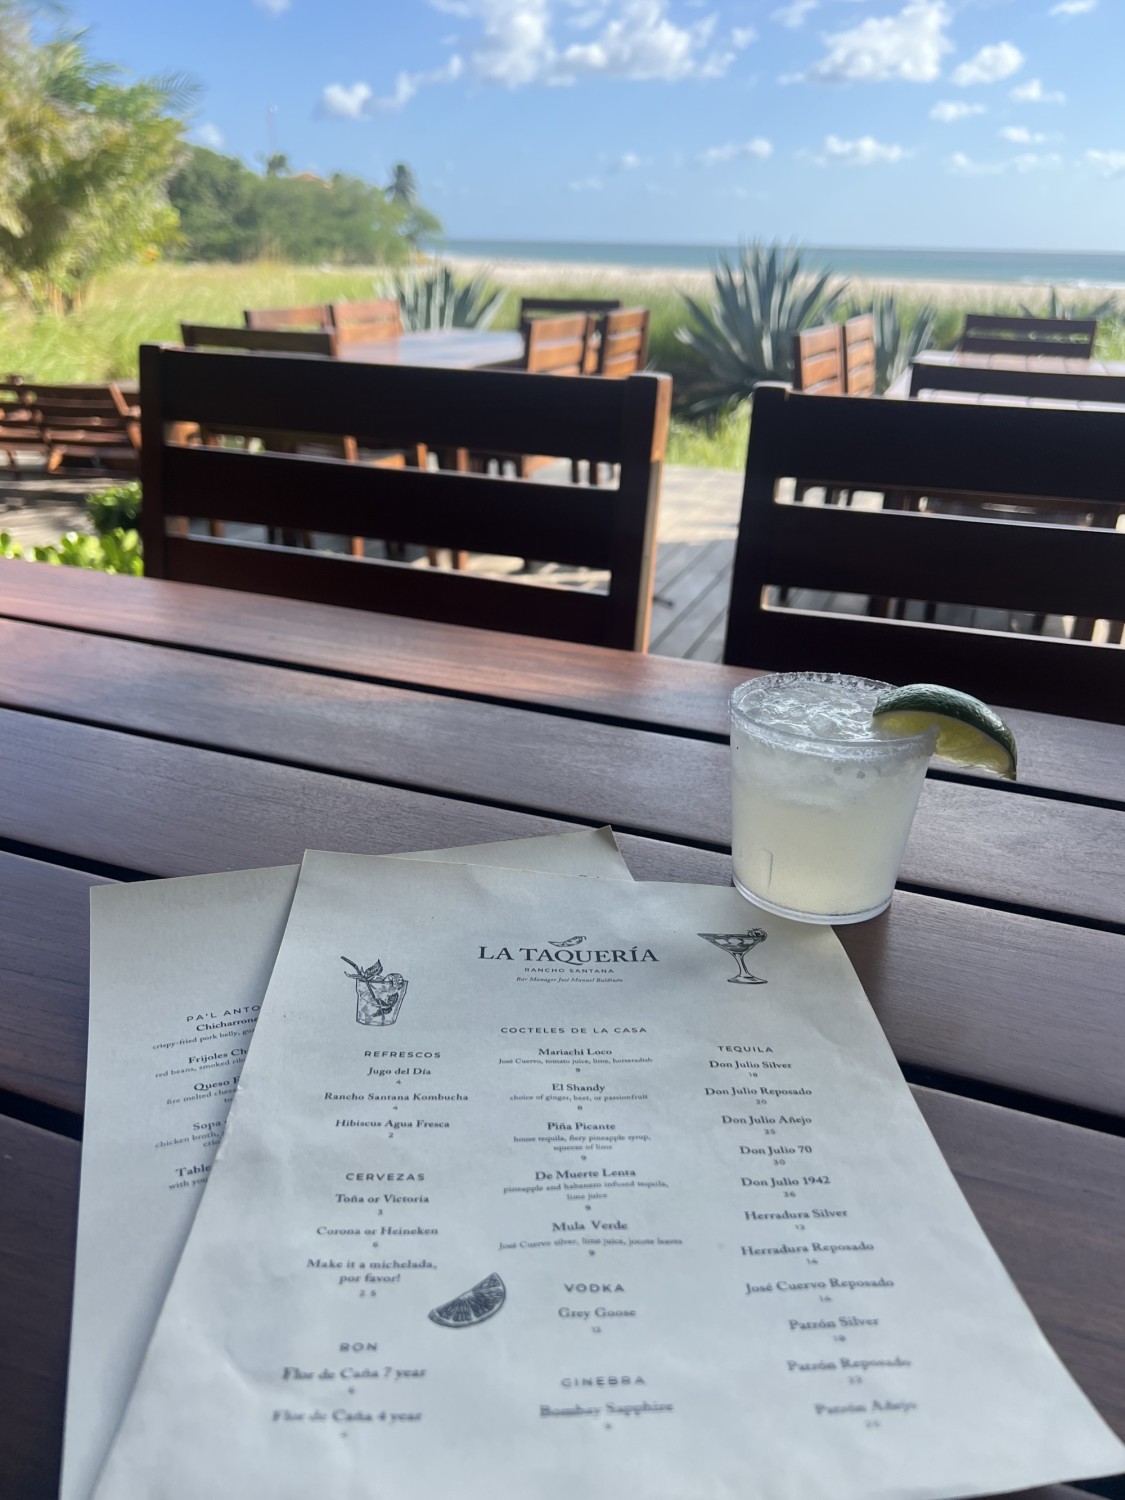 Wooden table at an outdoor restaurant with a menu and cocktail, overlooking a beautiful view